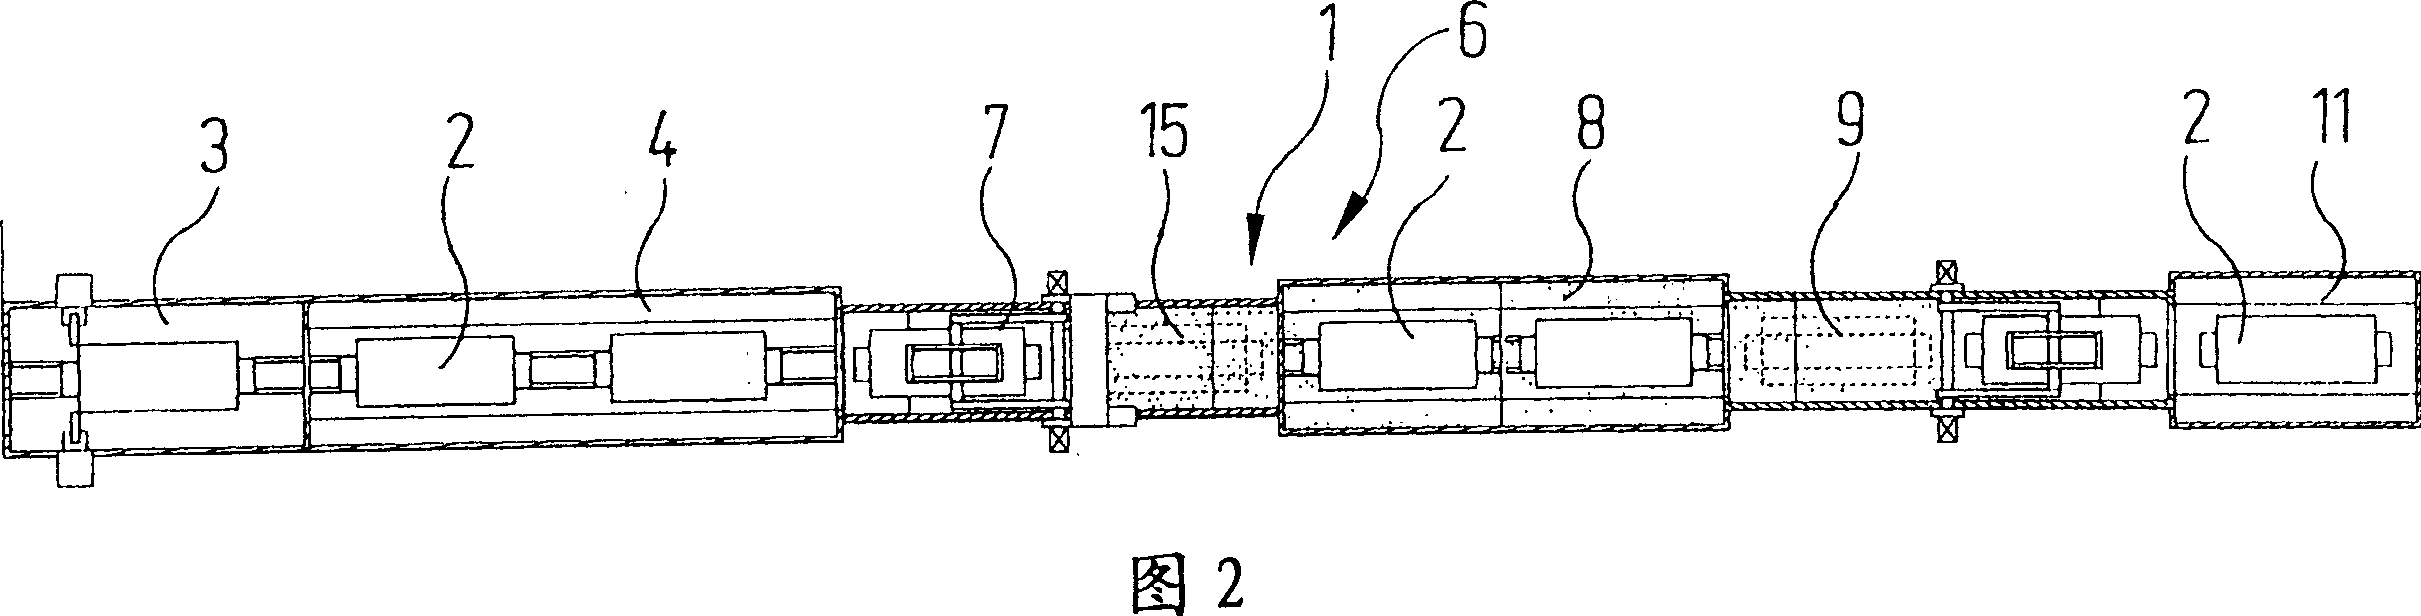 Method and device for drying painted vehicle bodies